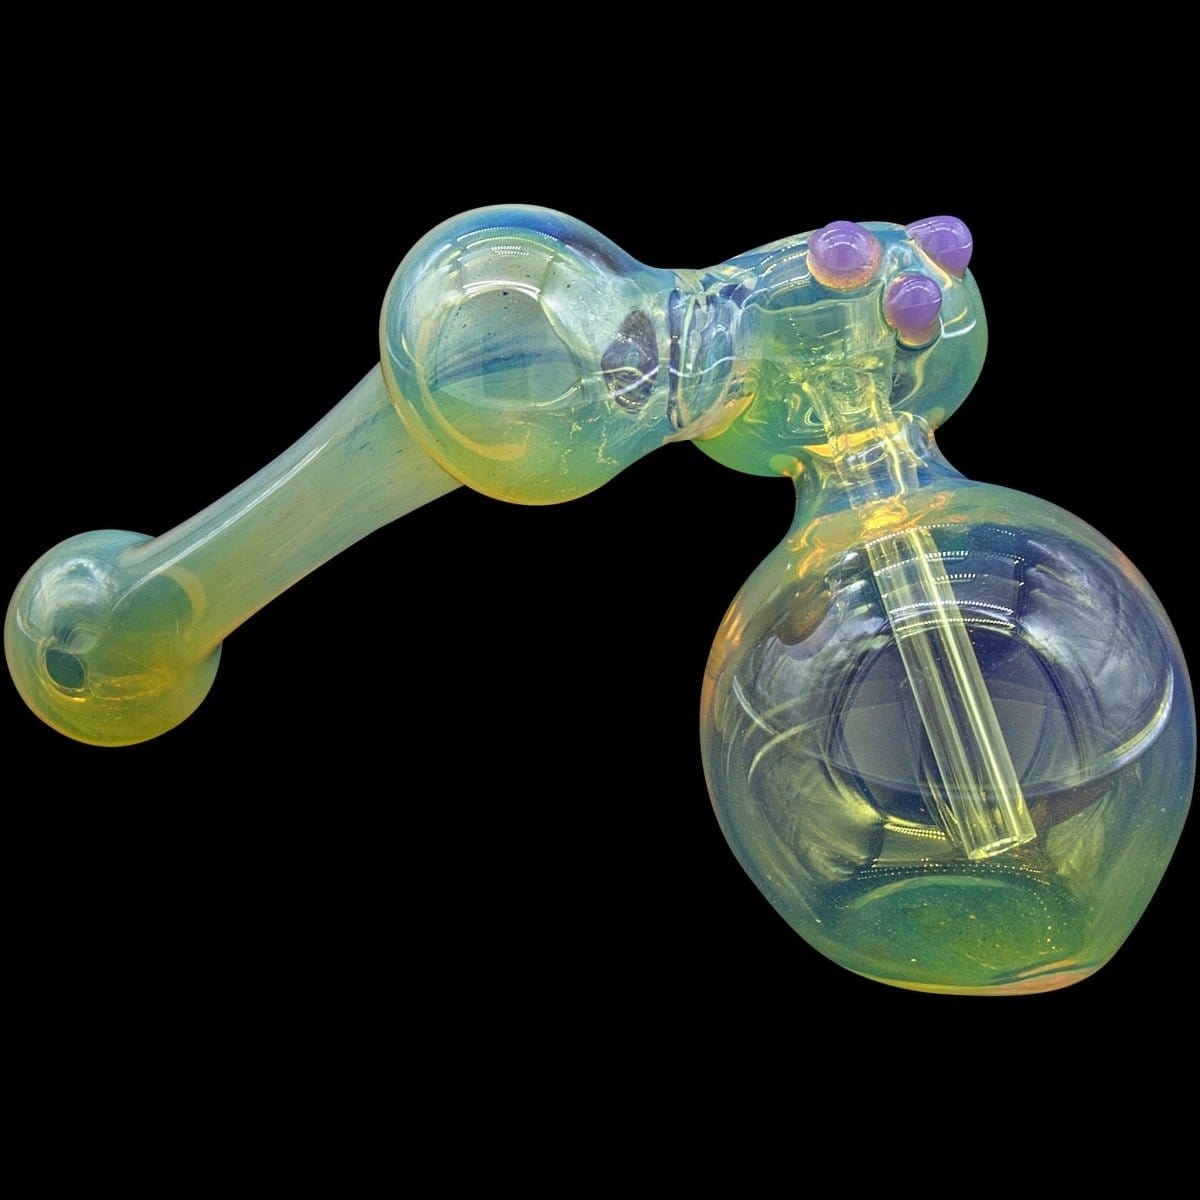 LA Pipes Bubbler Purple Slime "Silver Sidecar" Fumed Hammer Sidecar Pipe (Various Colors)